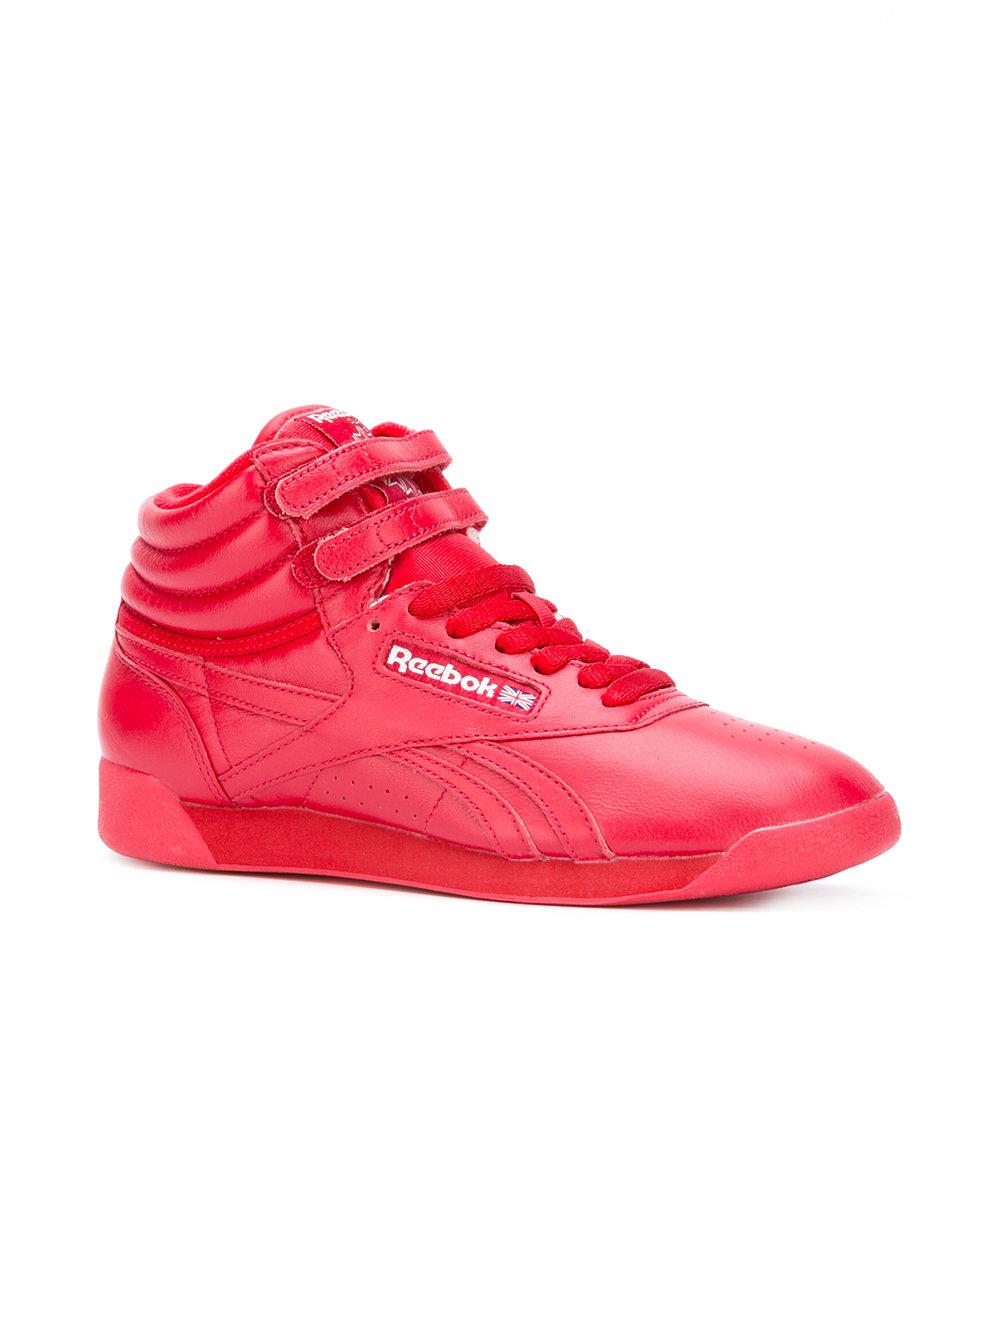 Reebok Leather Freestyle Hi-top Sneakers in Red - Lyst